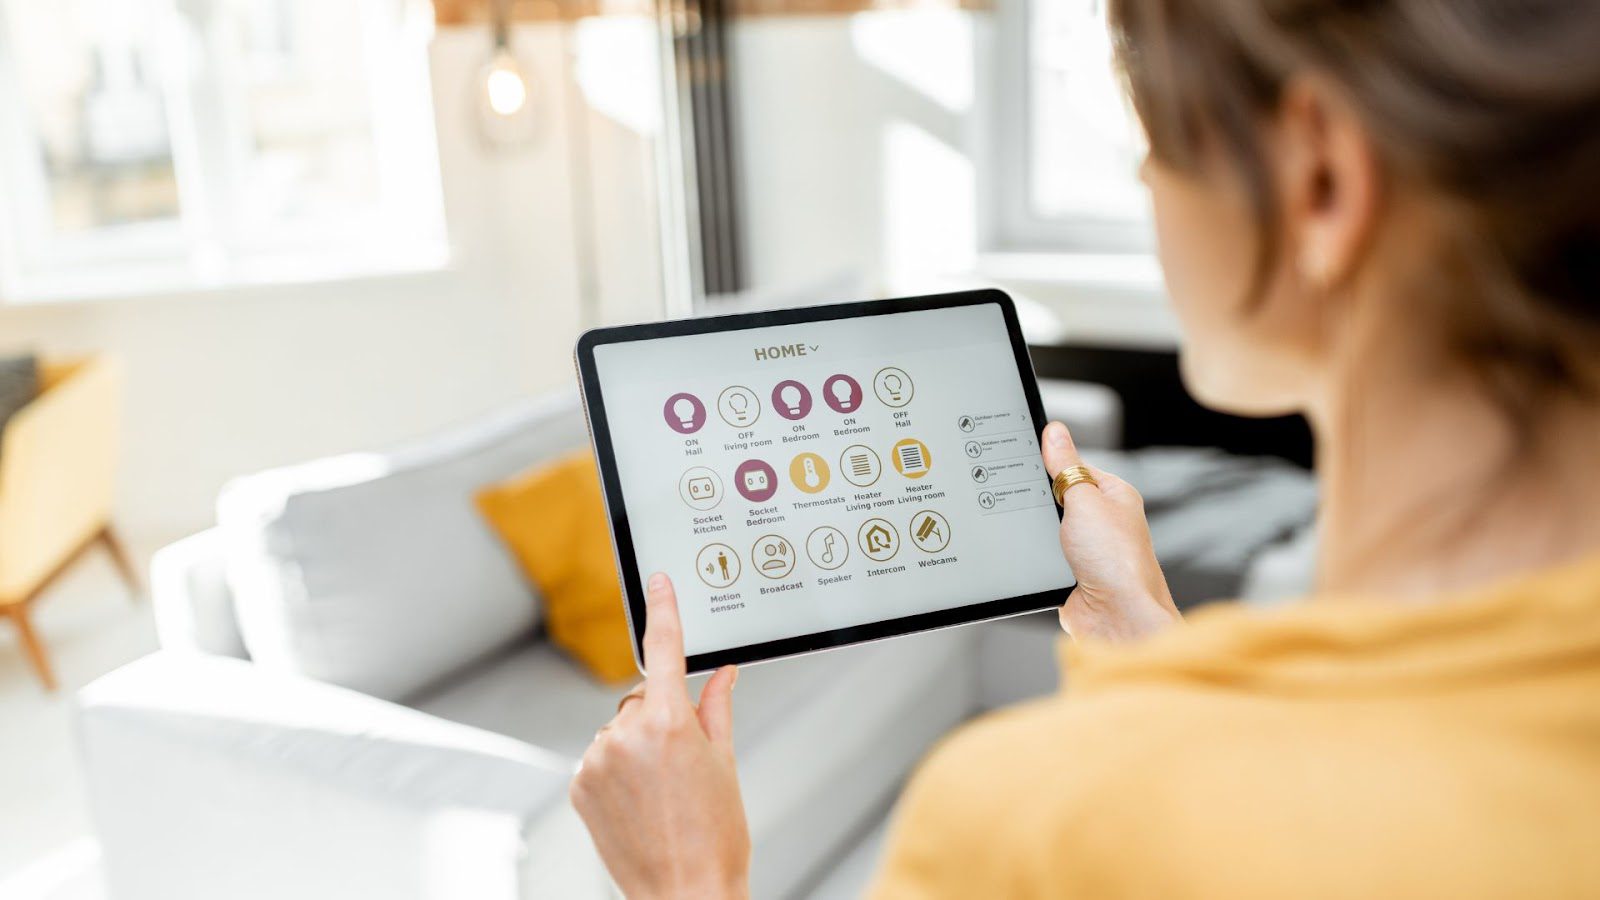 A person viewed from behind, focusing on a tablet displaying a smart home control panel with various icons for lighting, temperature, and security settings, in a bright living room setting.